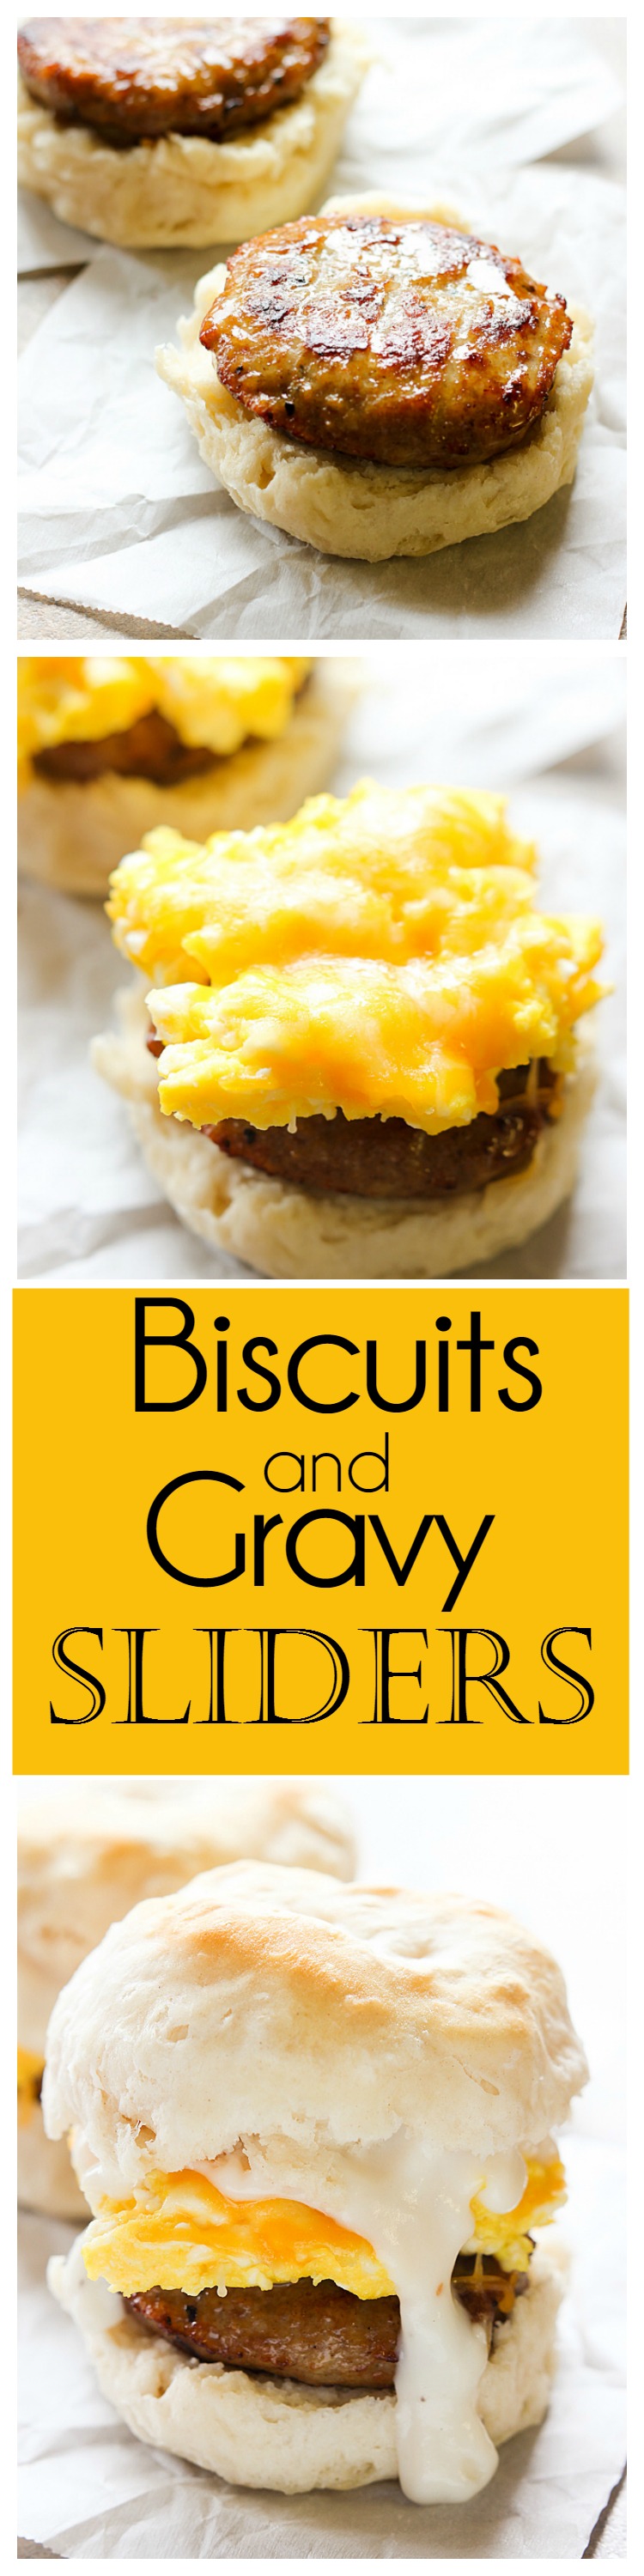 Biscuits and Gravy Sliders